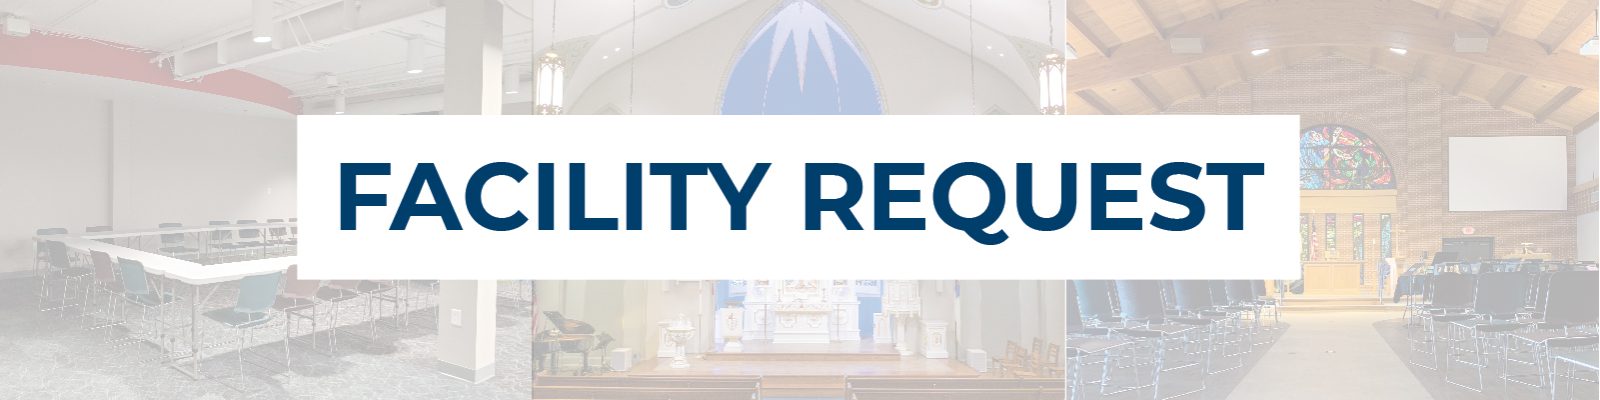 FacilityRequest_banner-01